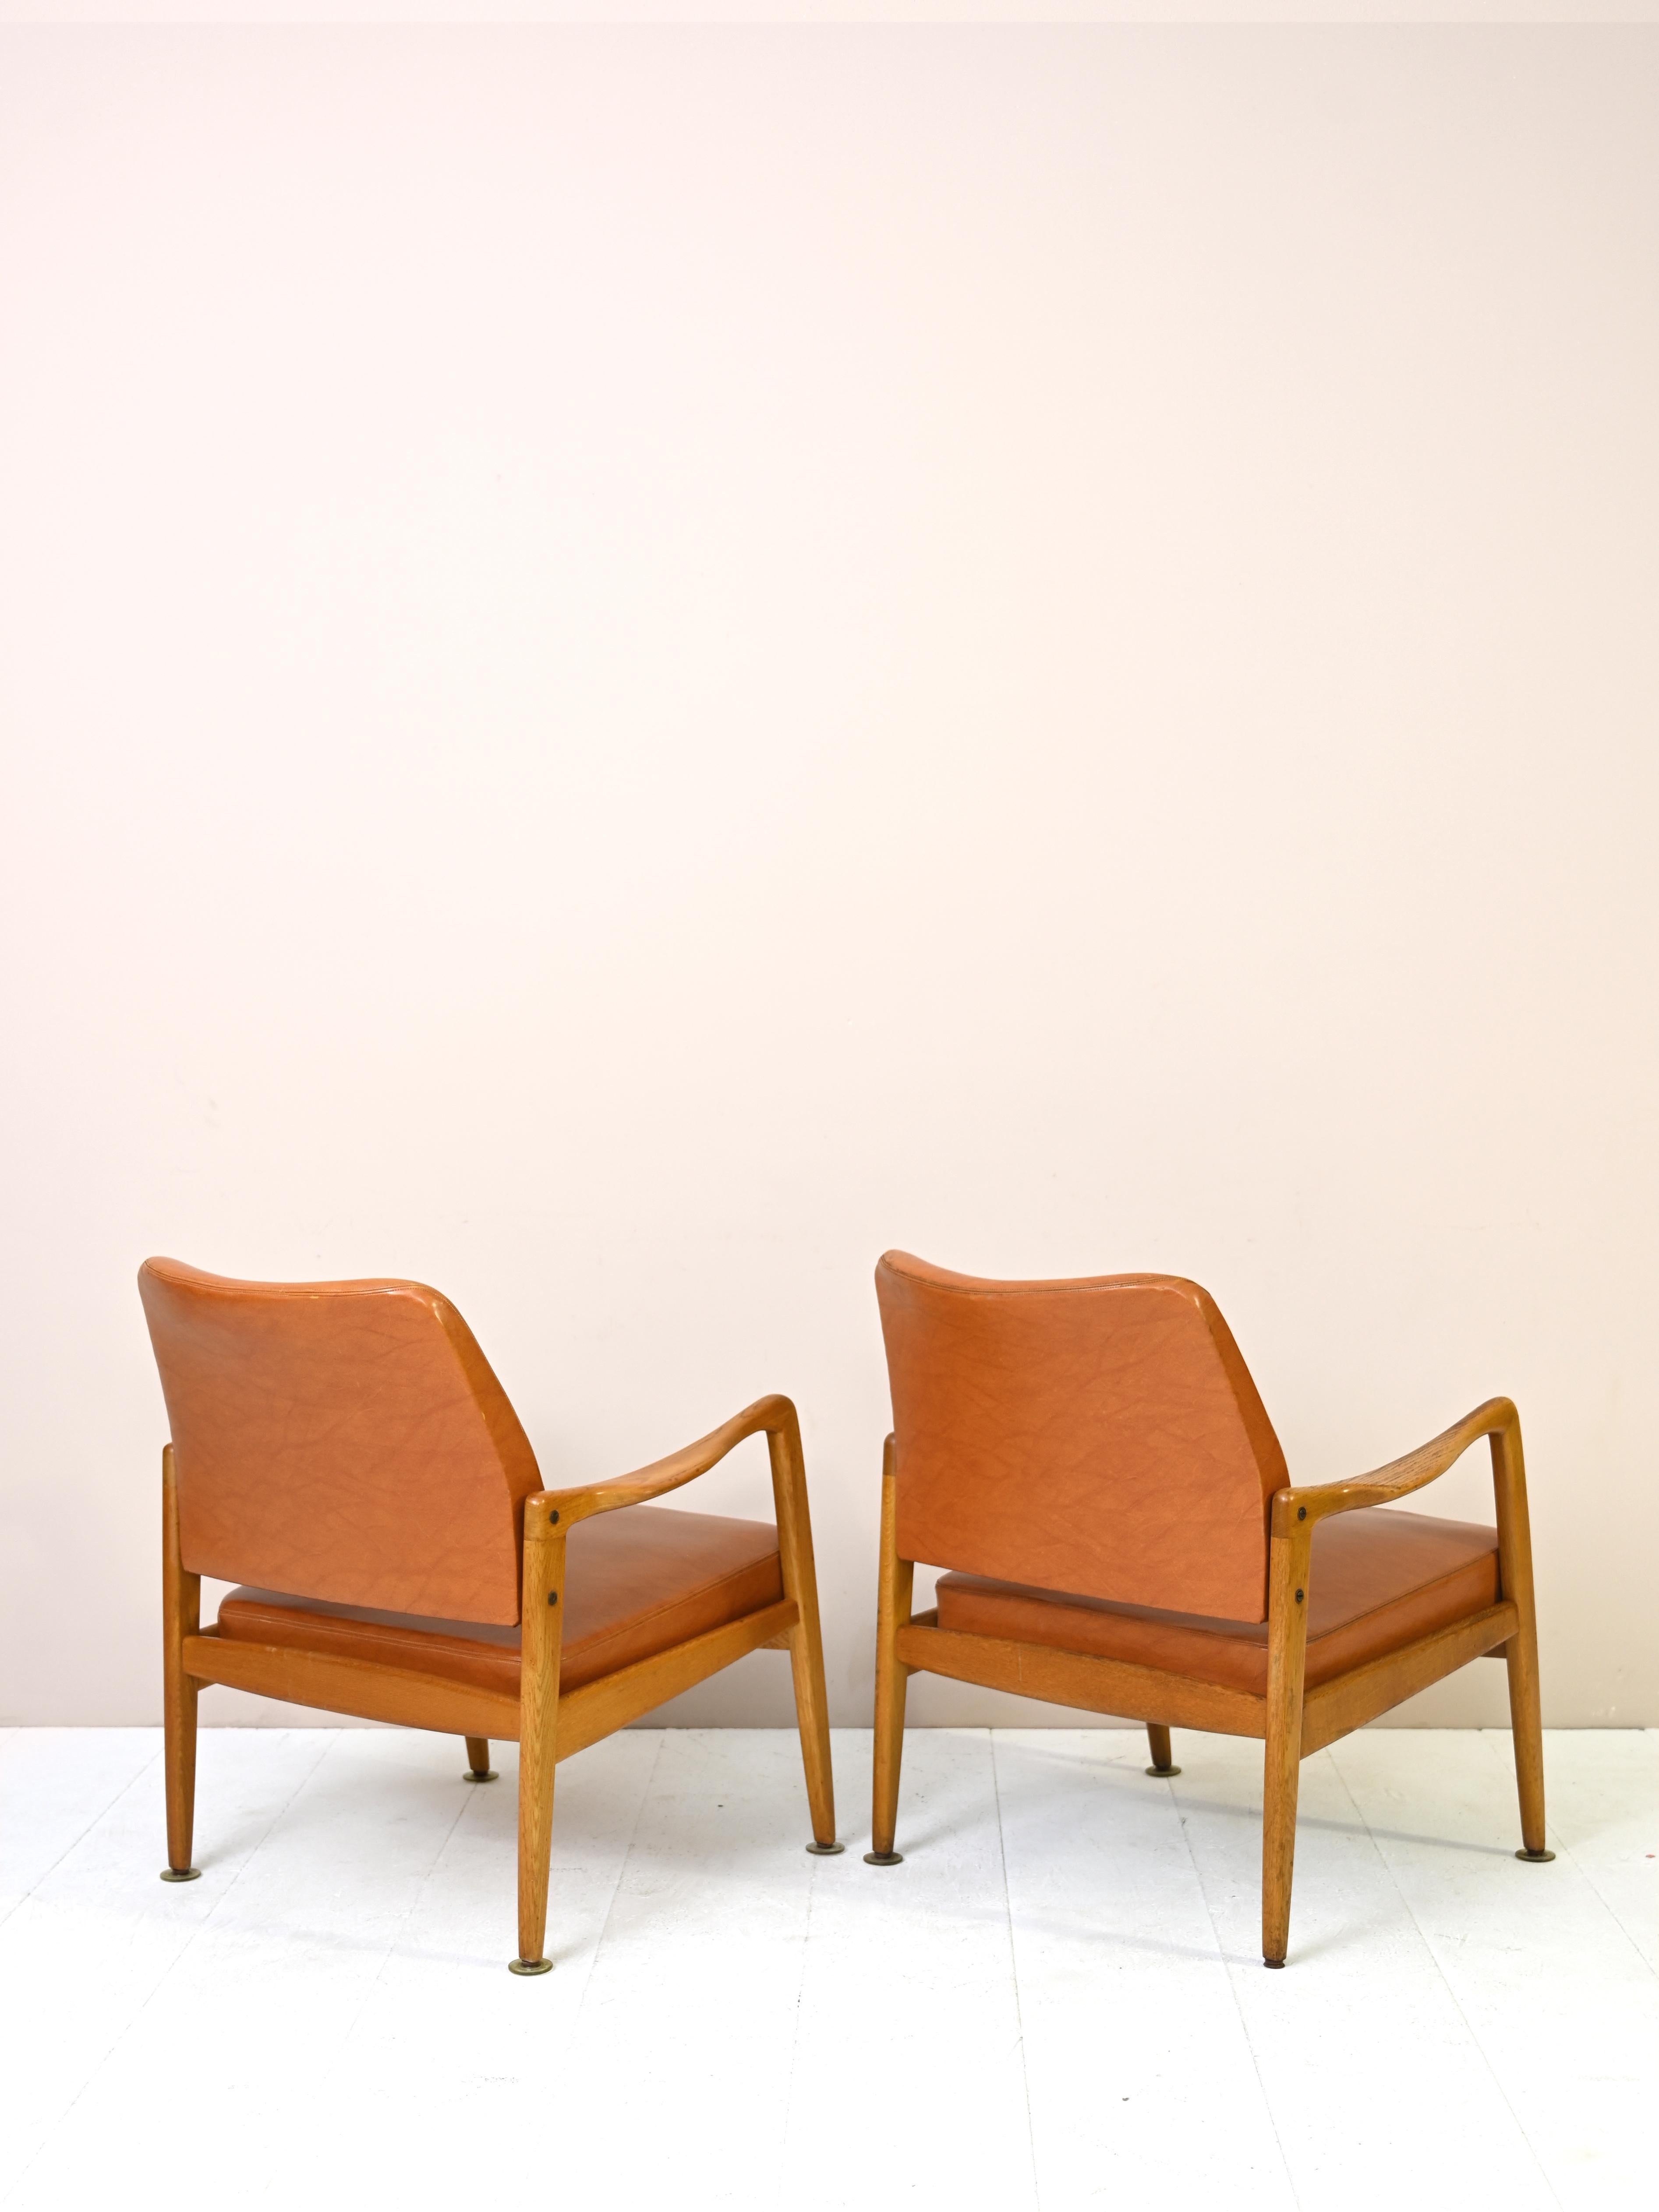 Mid-20th Century Vintage Danish Teak and Leather Armchairs For Sale